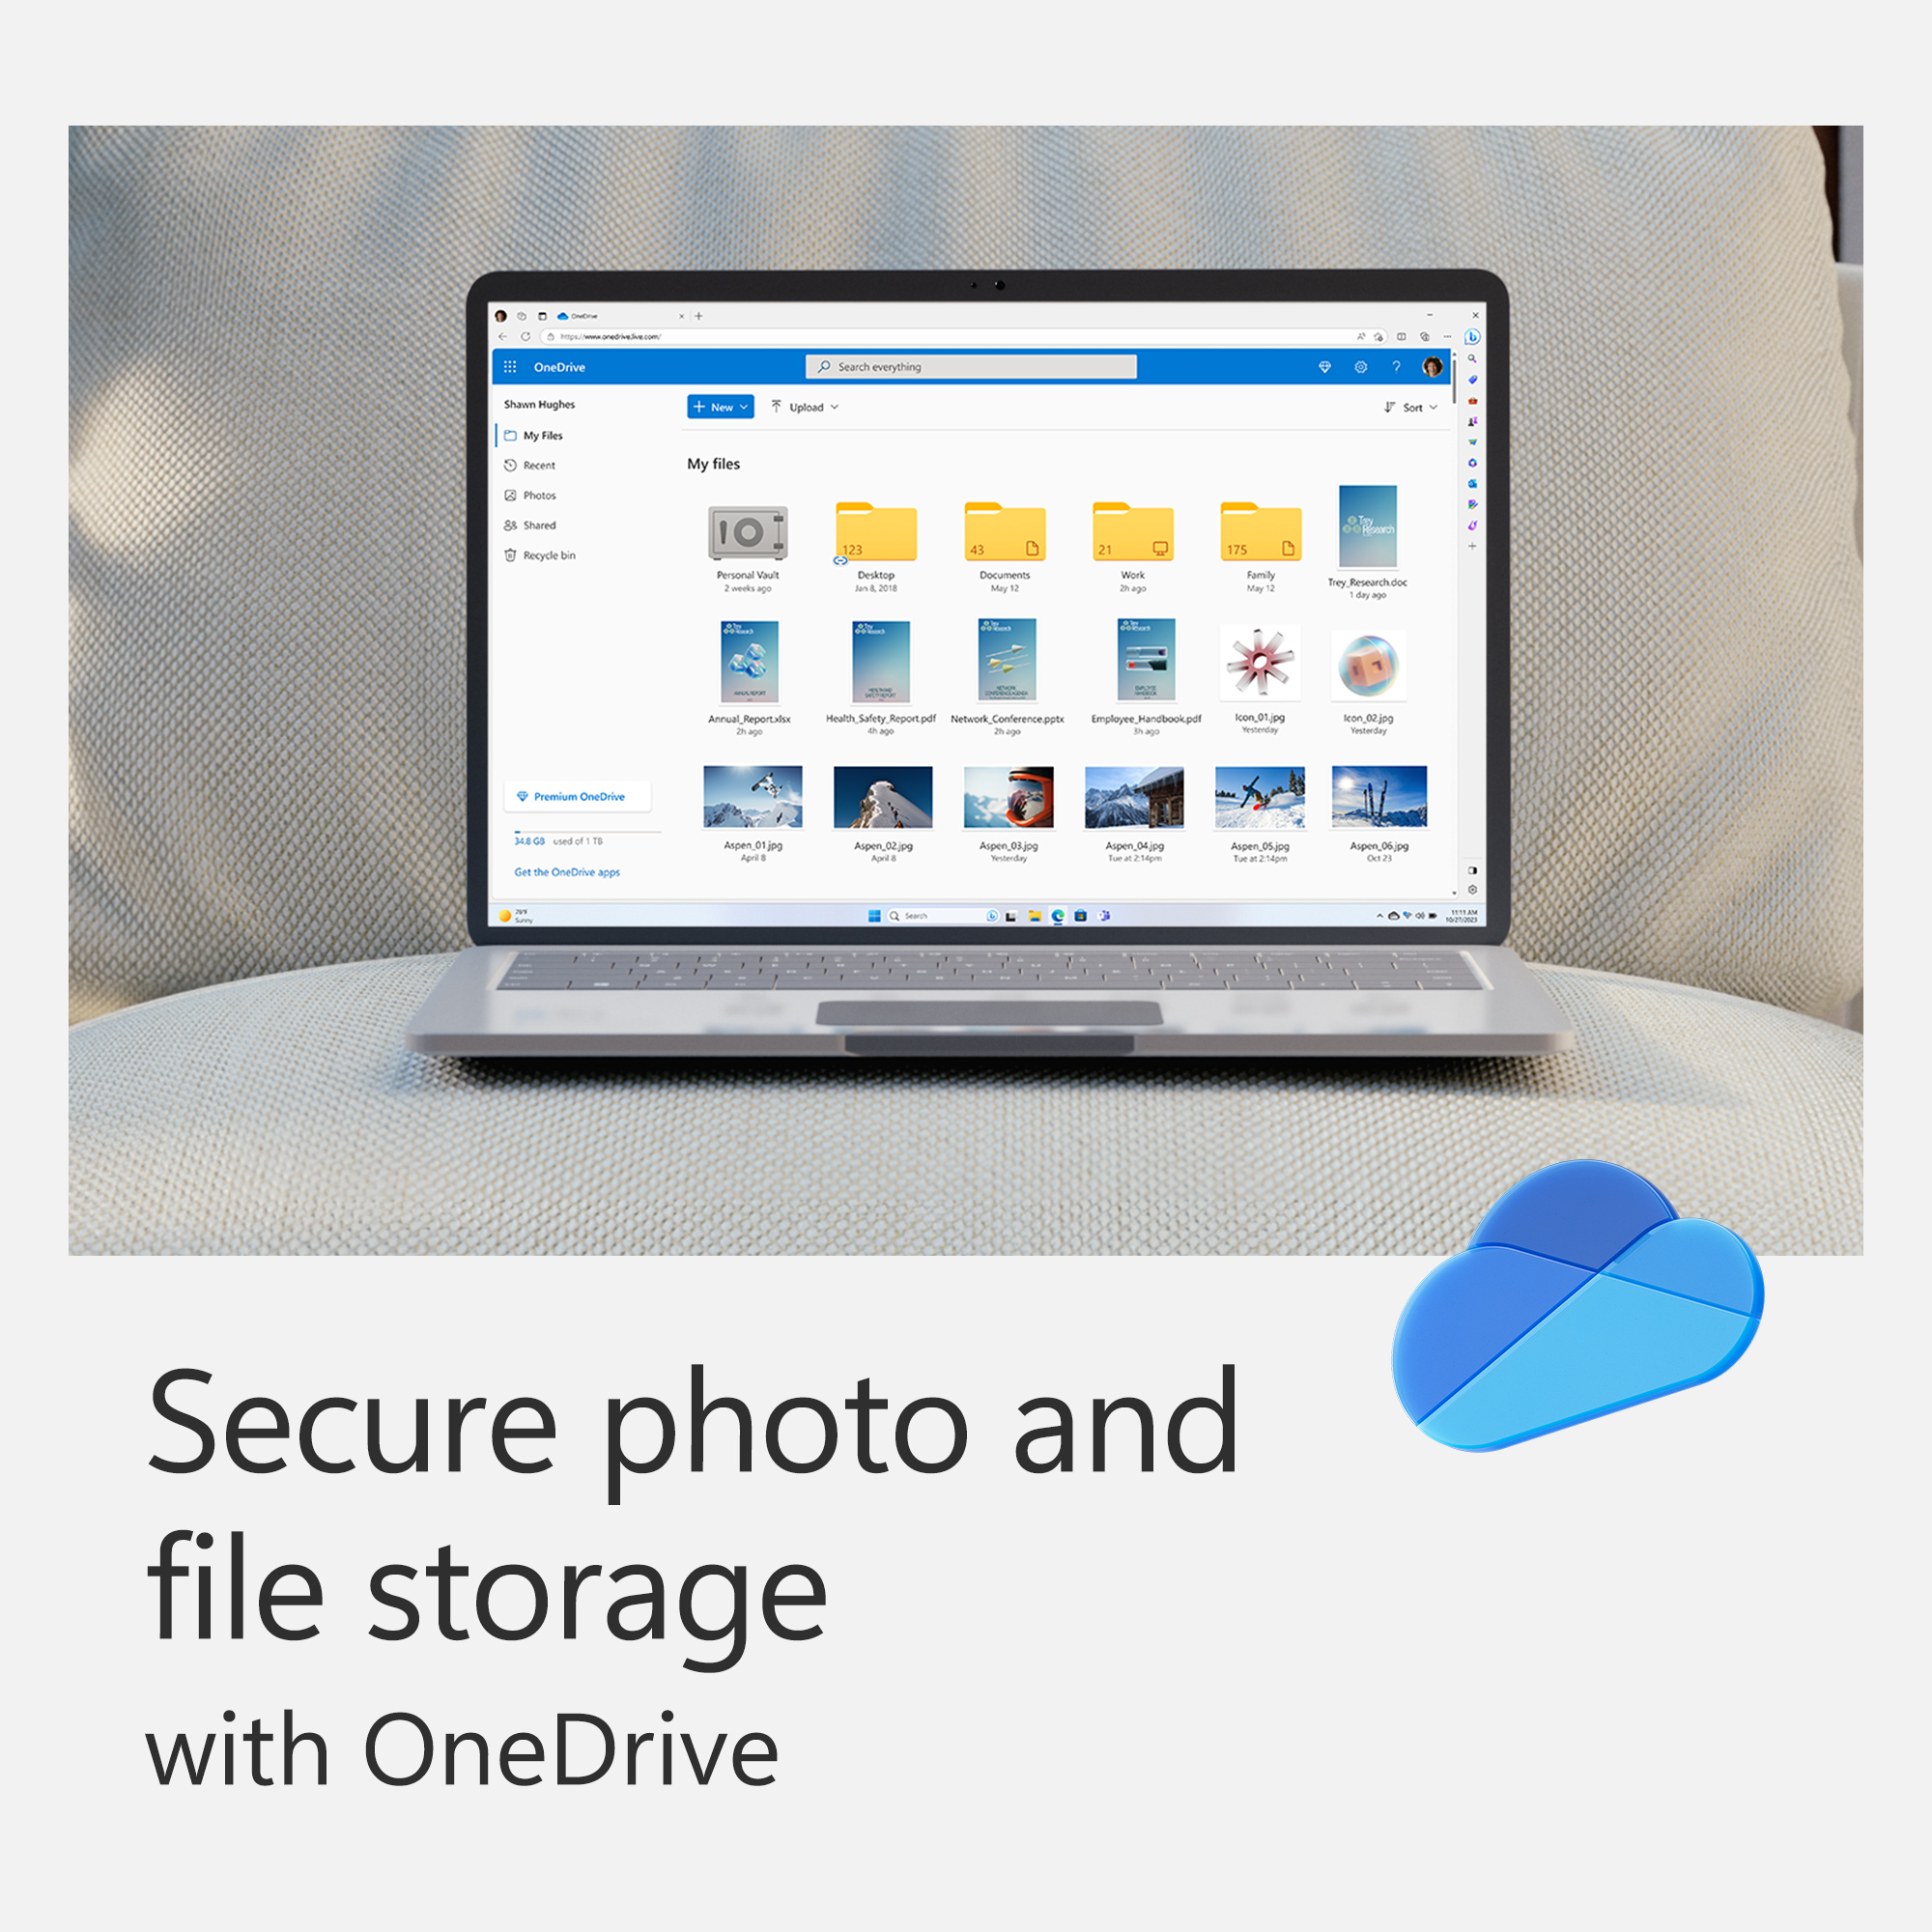 Microsoft 365 Family | 12-Month Subscription, up to 6 people | Premium Office apps | 1TB OneDrive cloud storage | PC/Mac Download - image 4 of 7